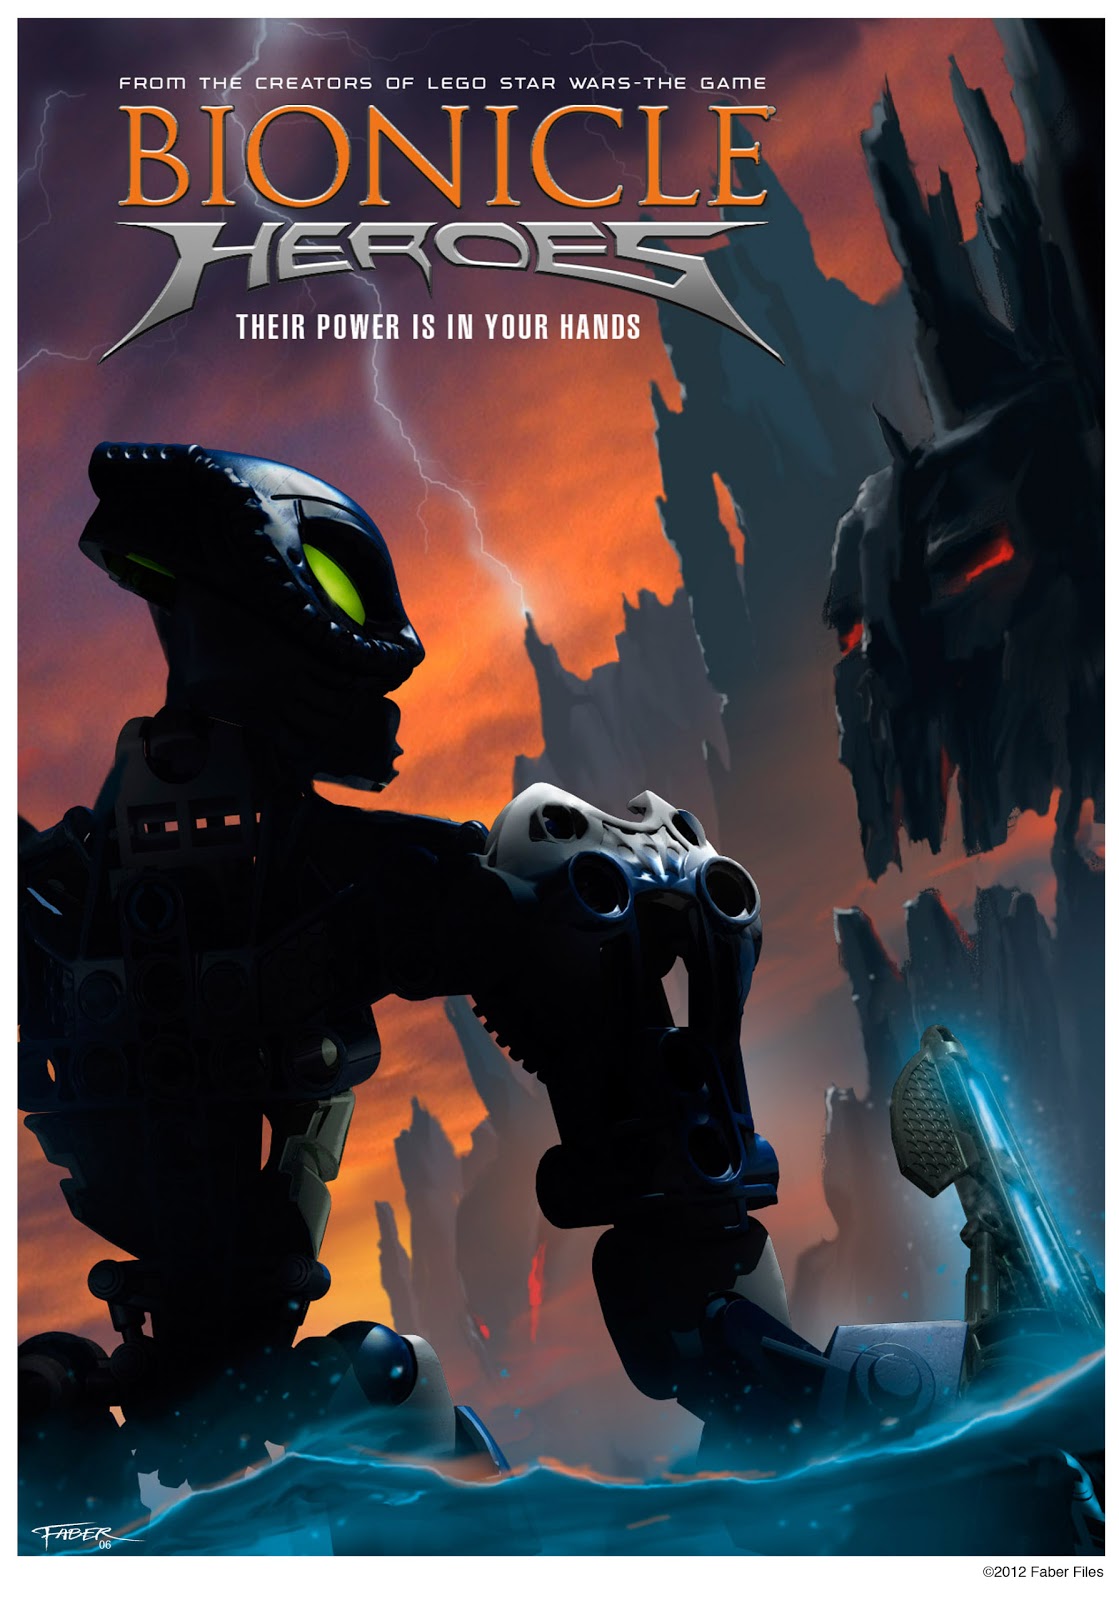 Bionicle Concept Arts - Página 3 Christian+Faber+Files_Bionicle+Heroes+cover+sketch2